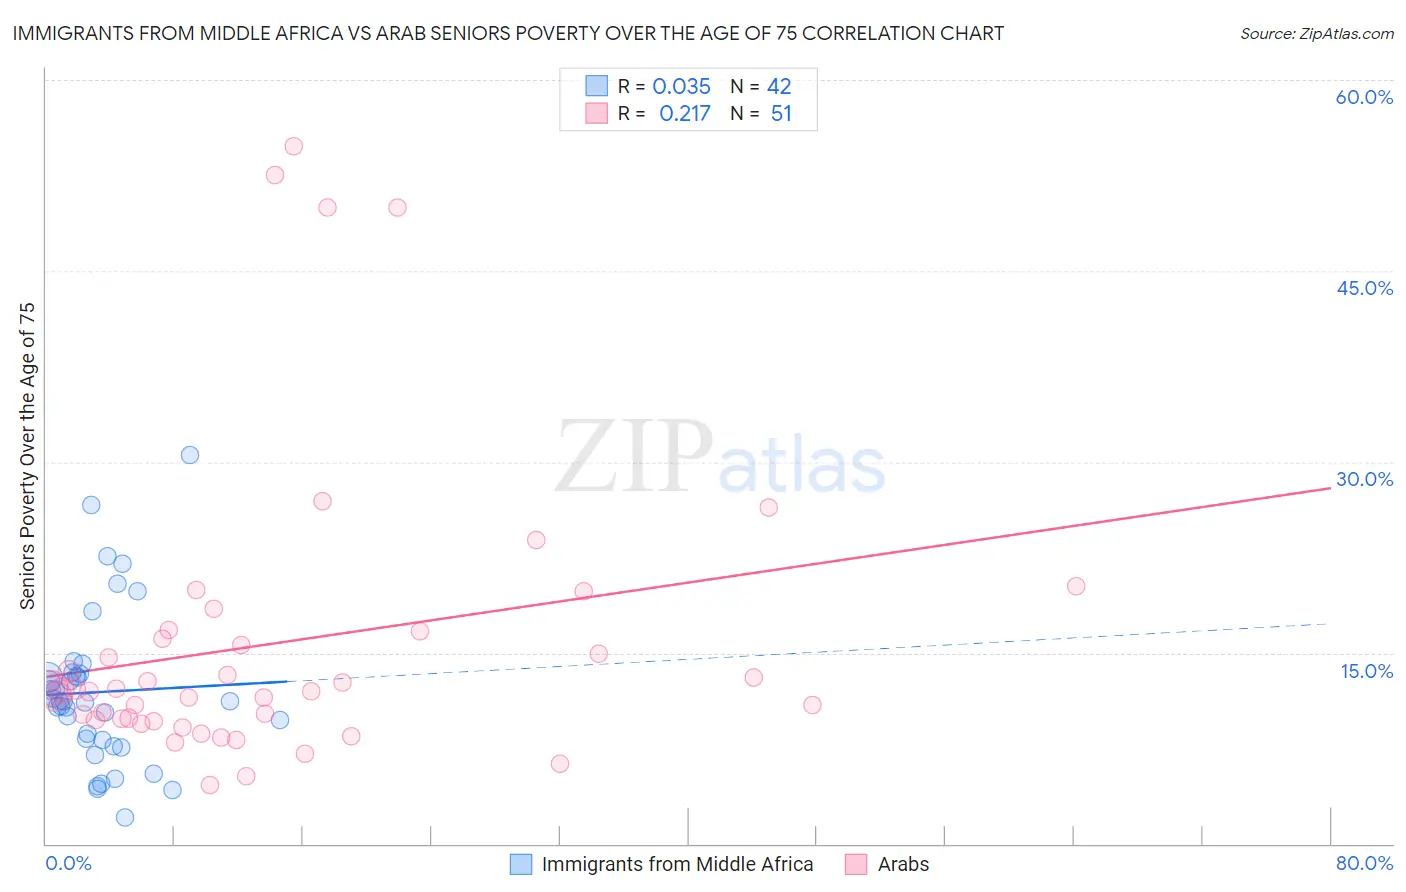 Immigrants from Middle Africa vs Arab Seniors Poverty Over the Age of 75